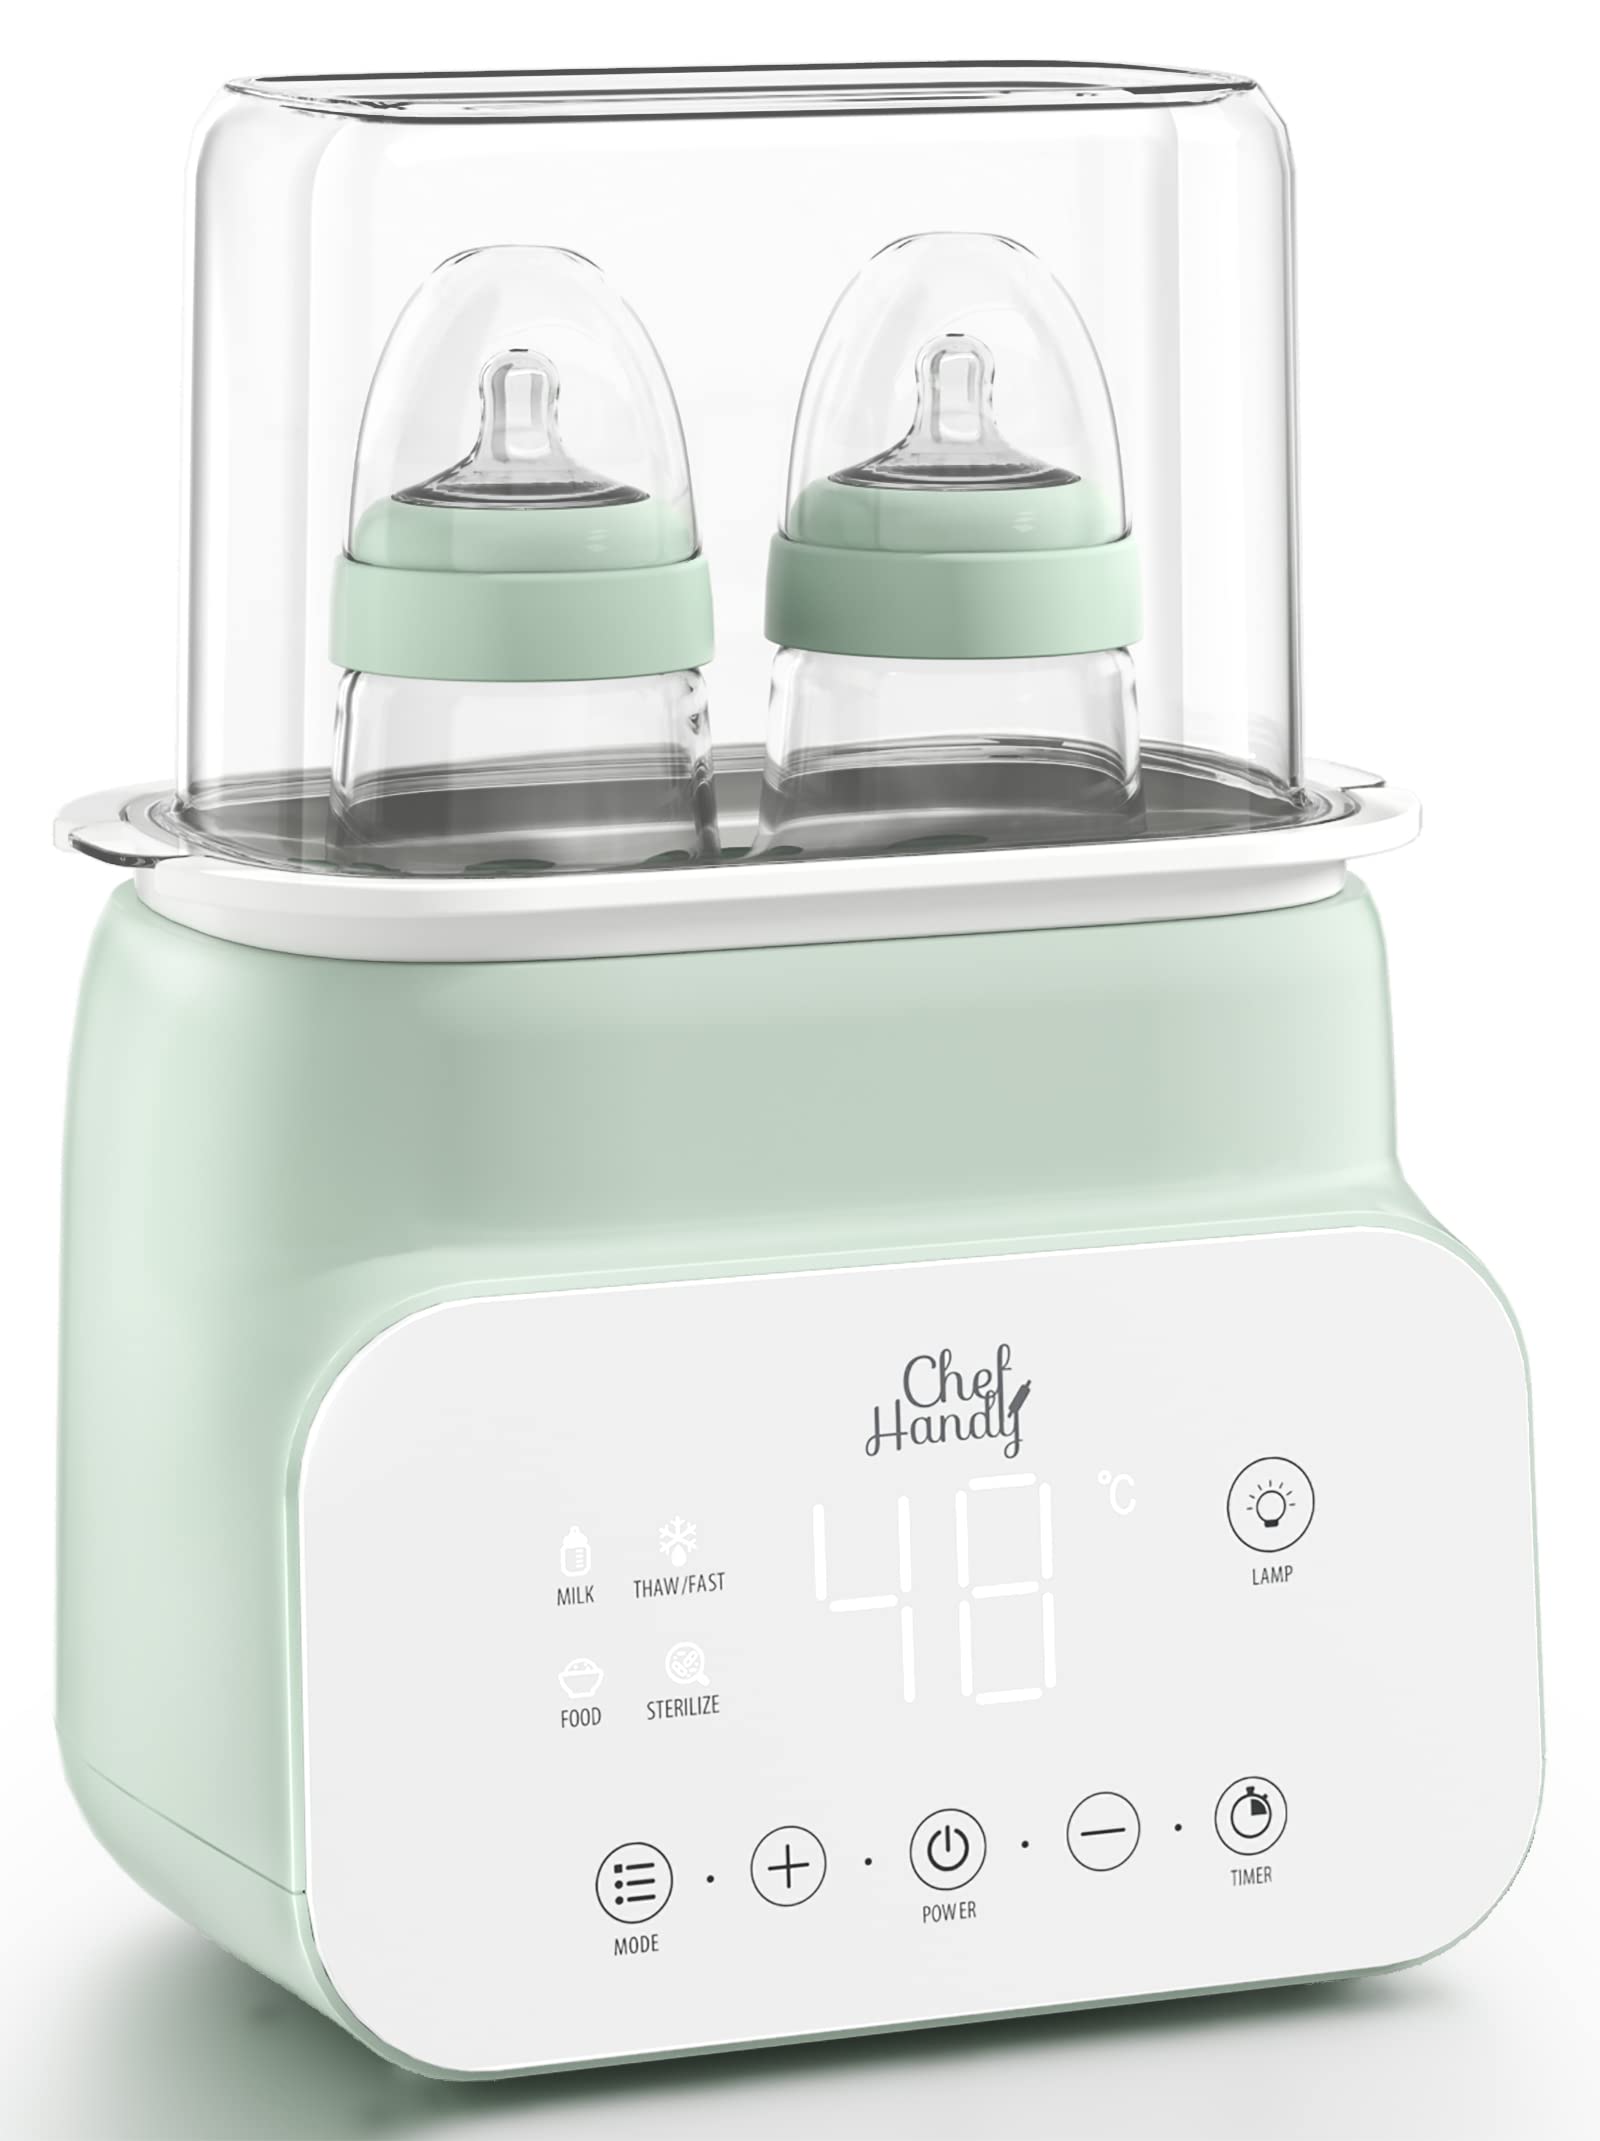 Baby Bottle Warmer, 7 in 1 Fast Bottle Warmer for Breastmilk, Food Heater&Thaw with Timer, Formula Milk Warmer with LCD Display, Accurate Temperature Control, Bottle Warmer for Baby Milk and Formula